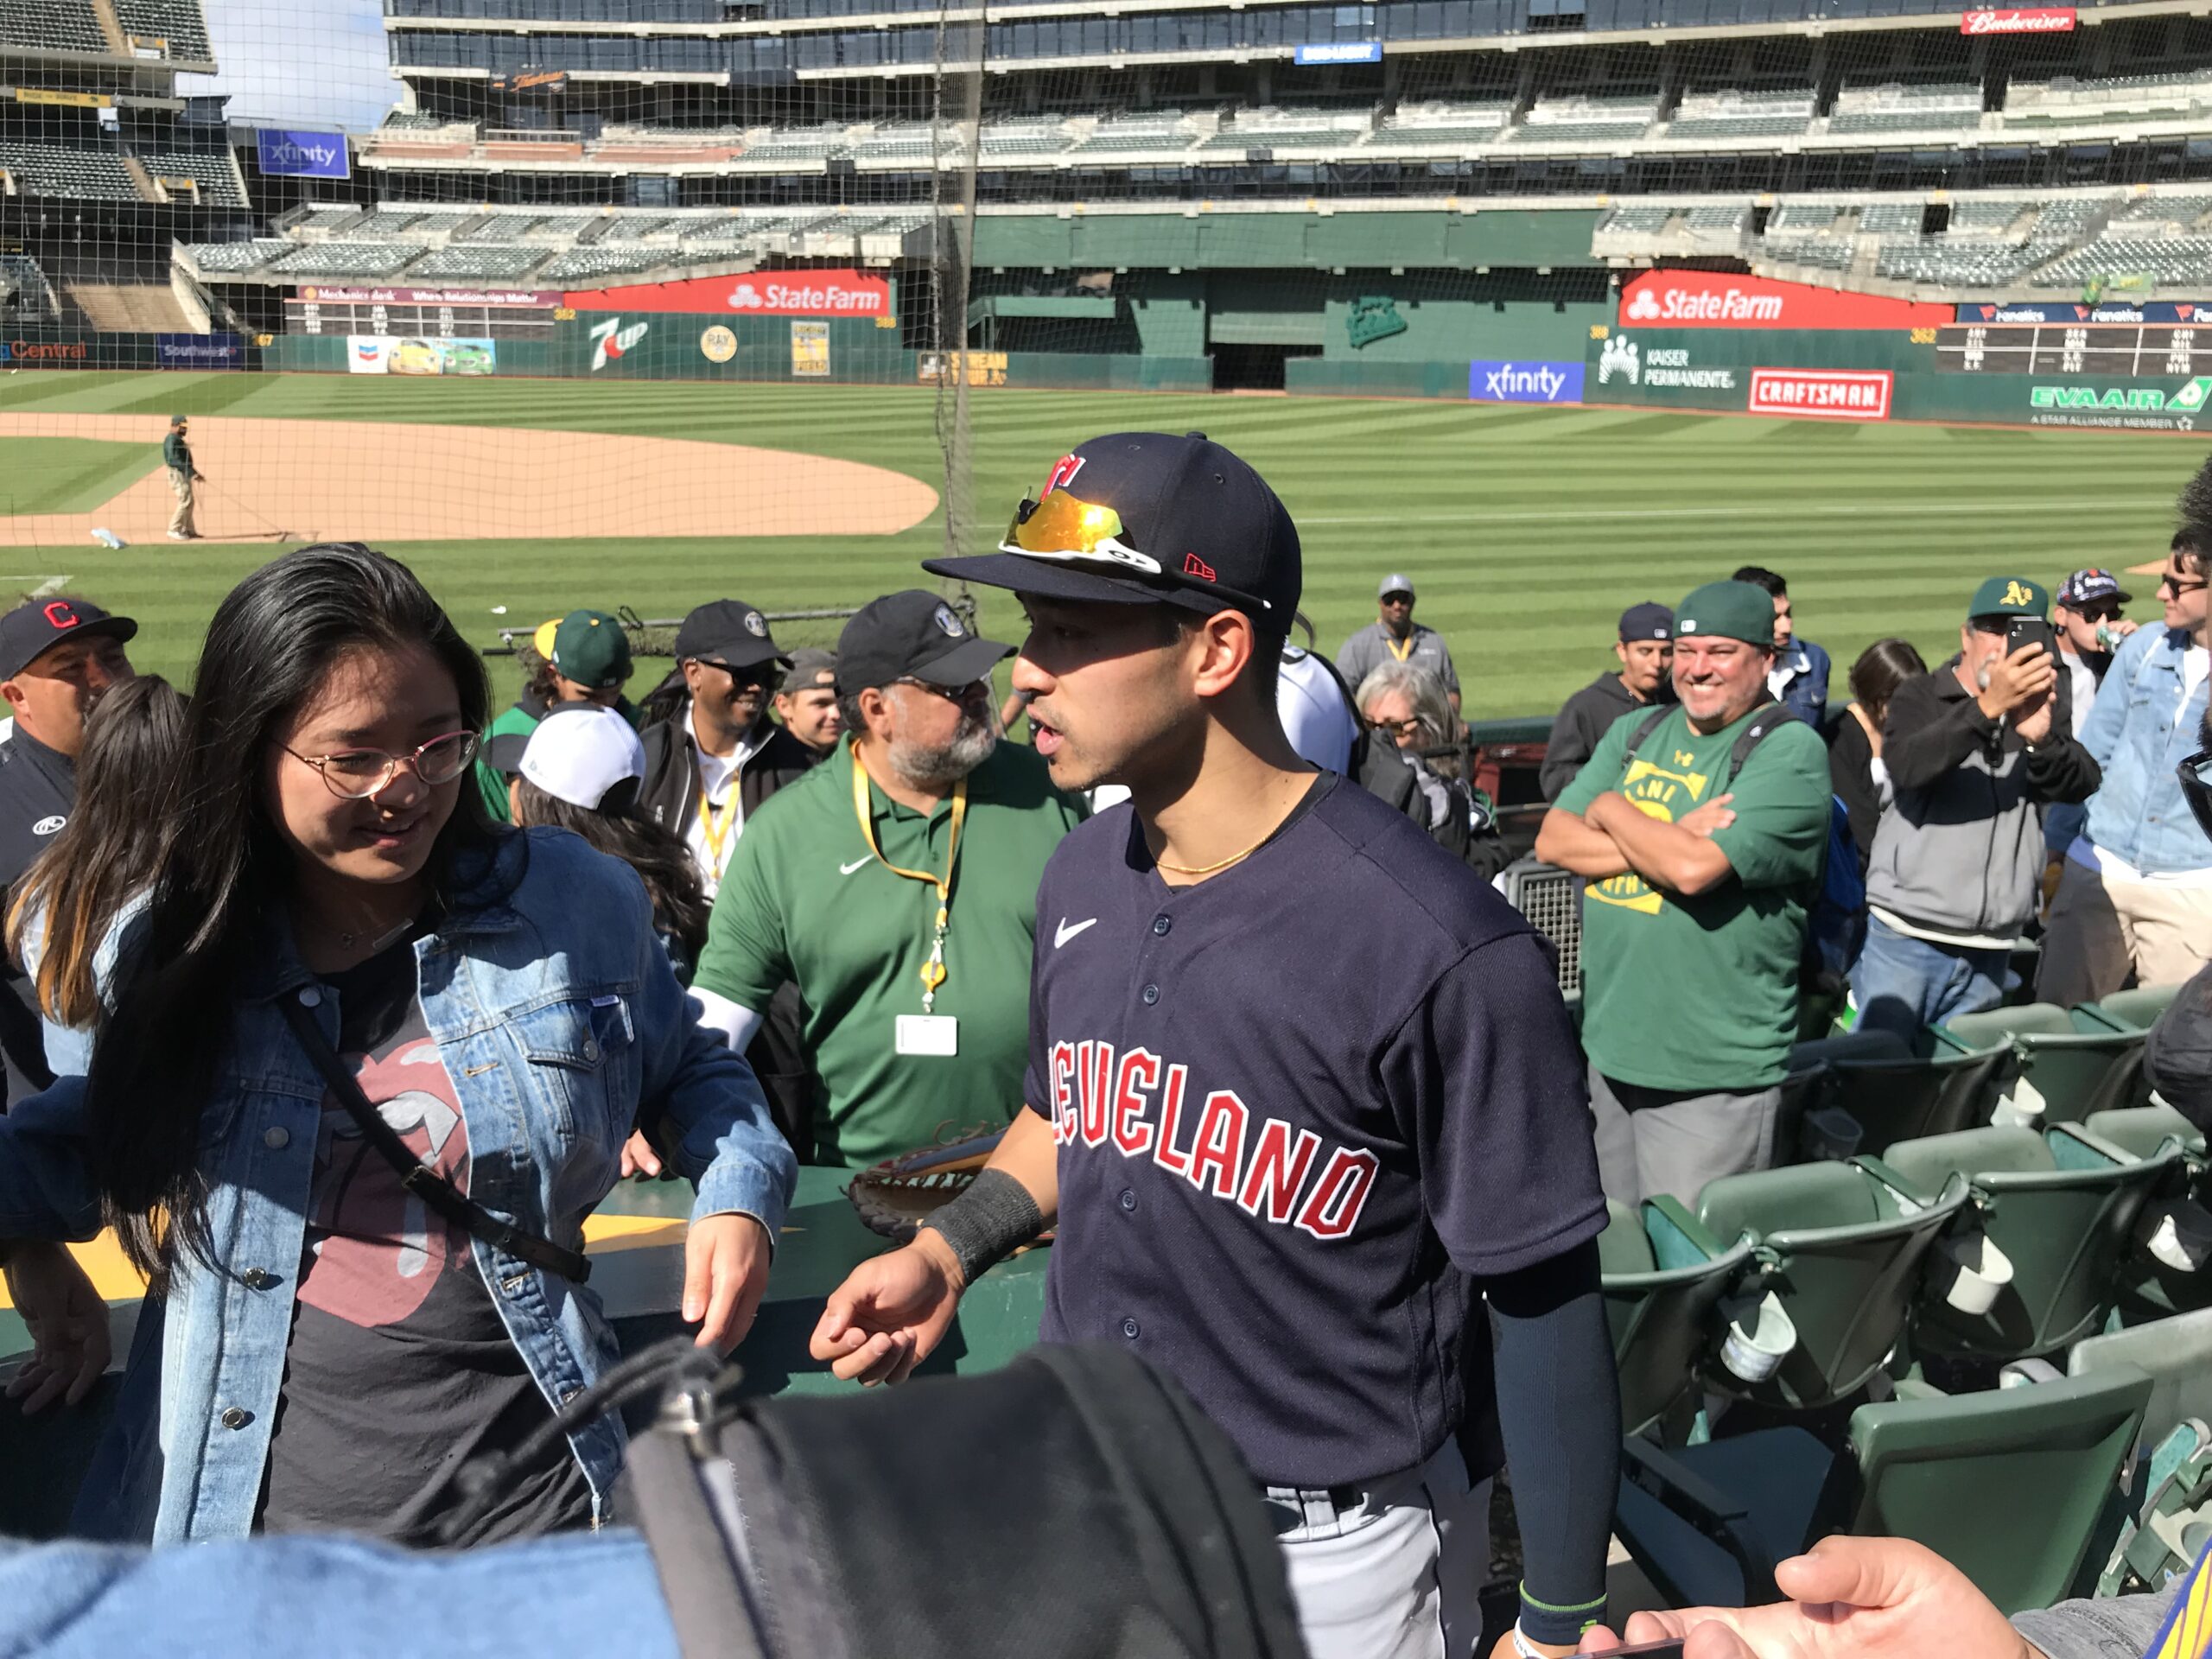 Steven Kwan is making an instant impact in Guardians outfield